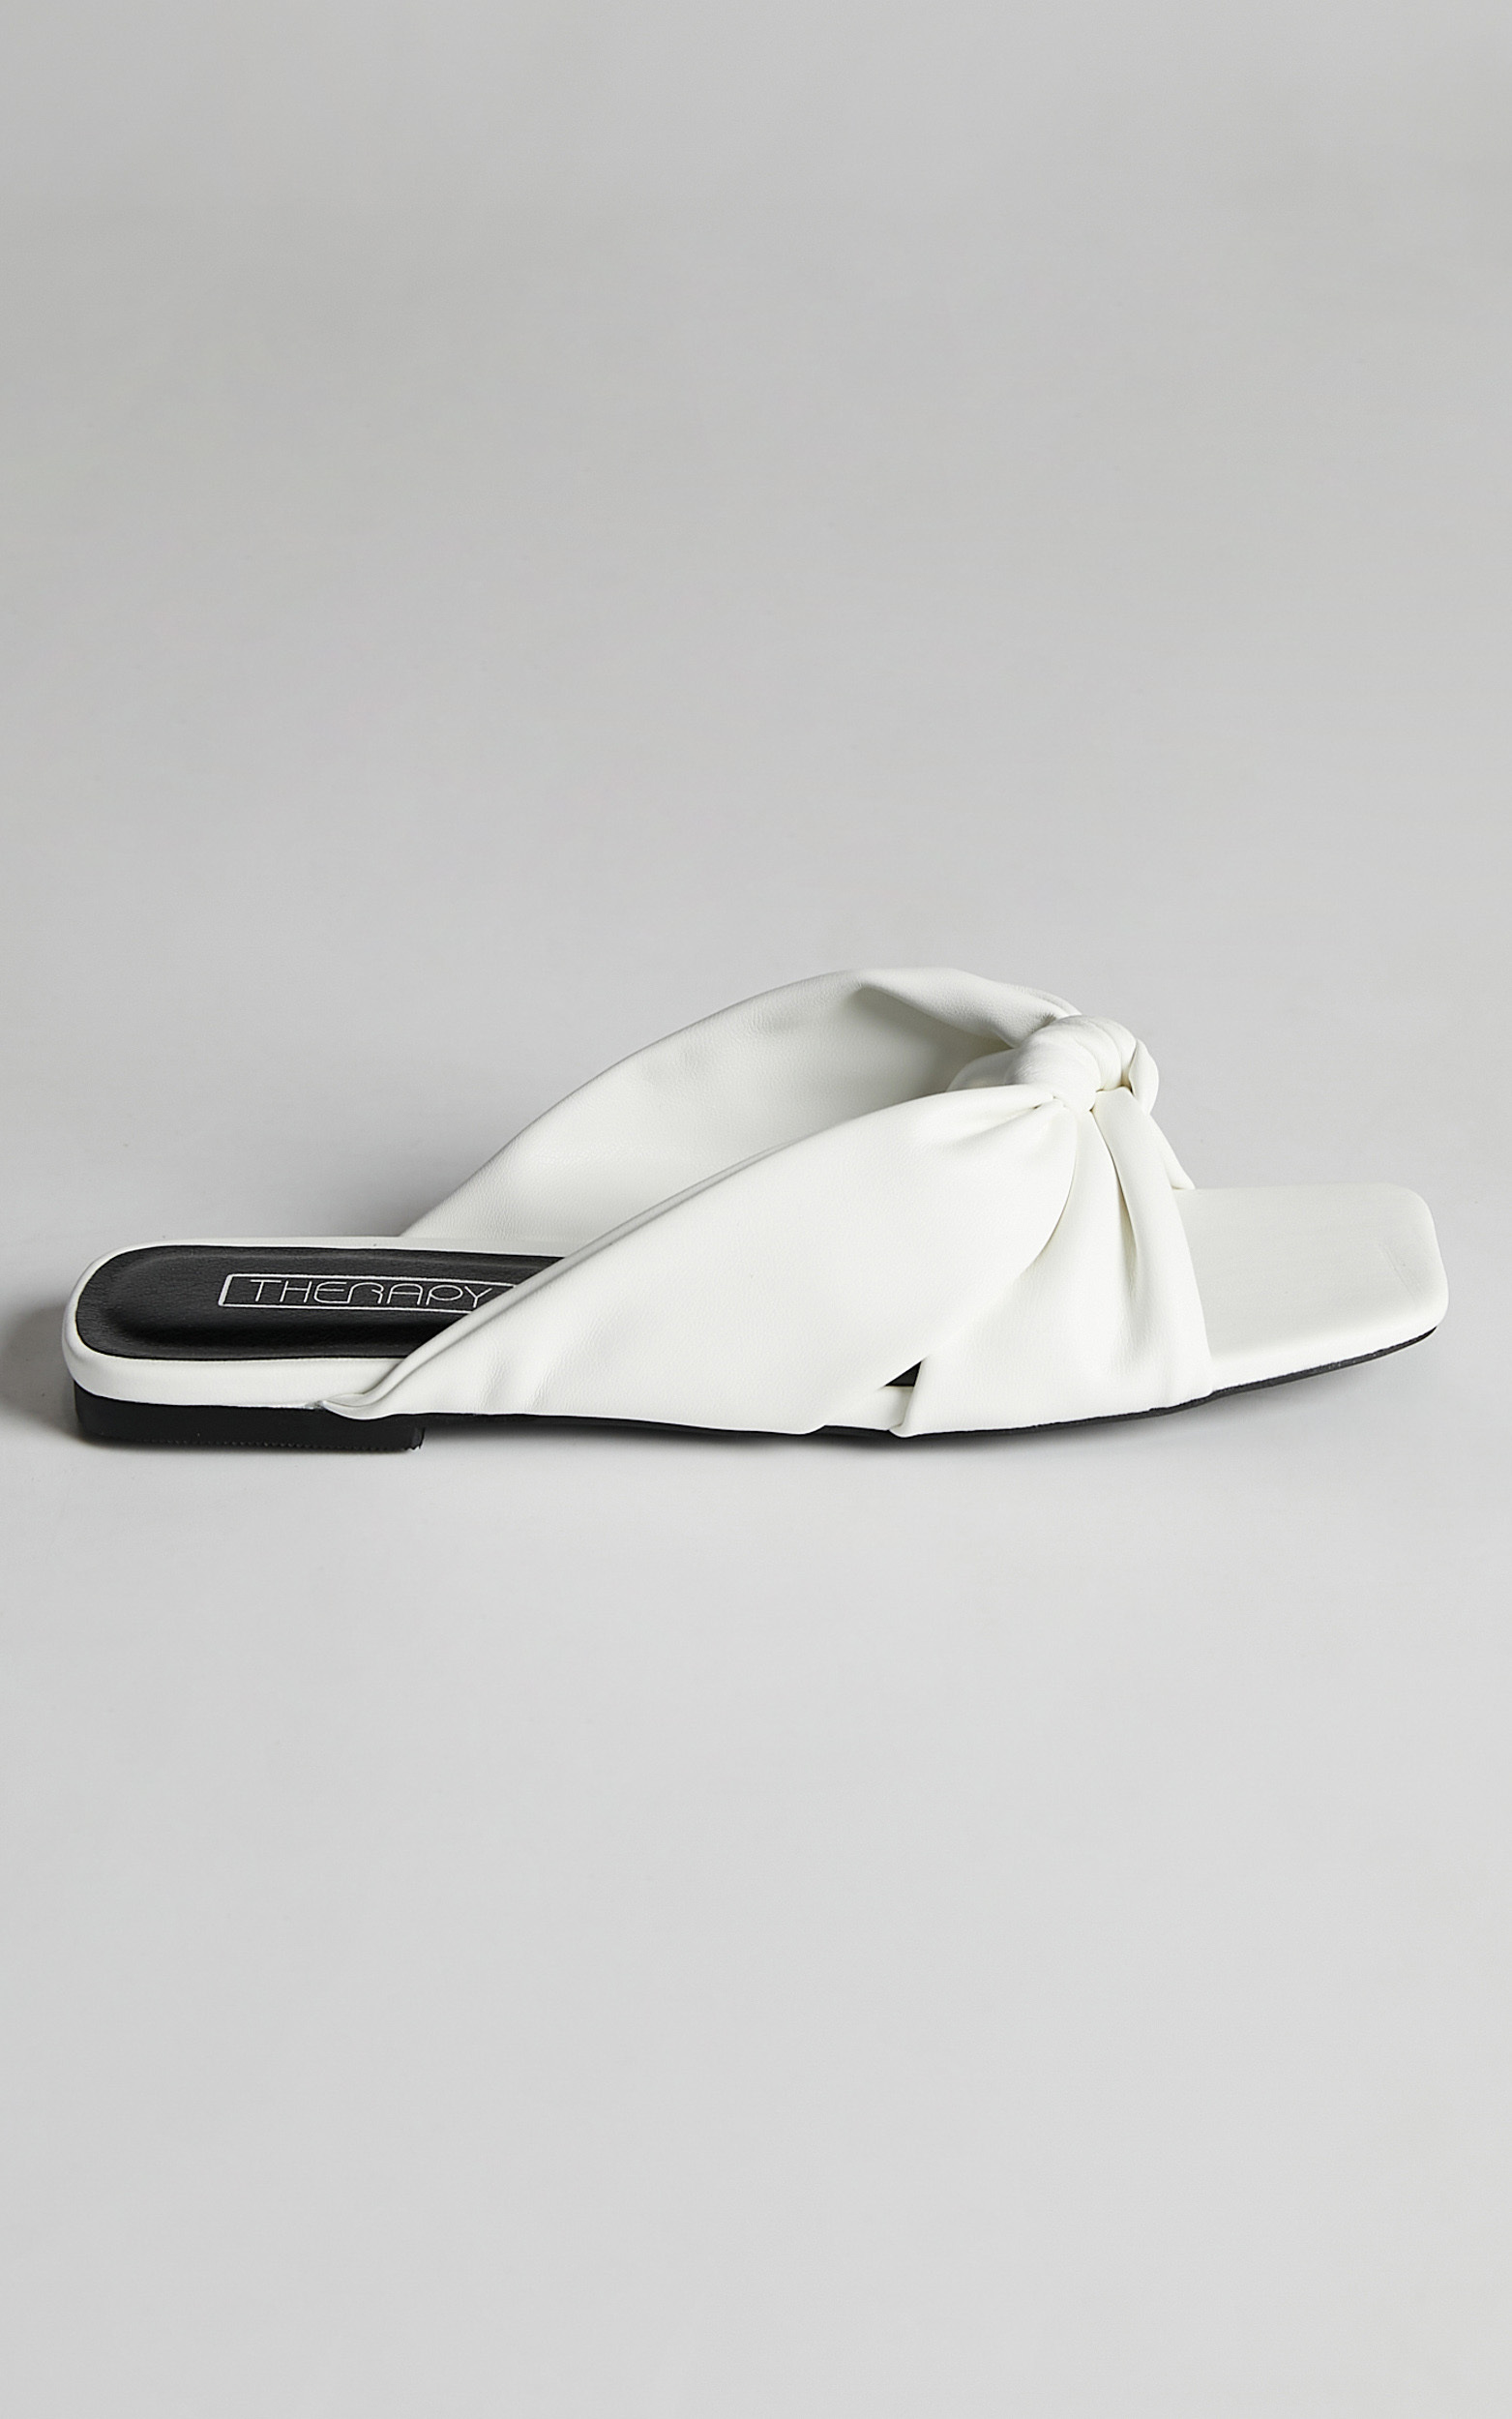 THERAPY - SOFIA SANDALS in White - 05, WHT2, hi-res image number null